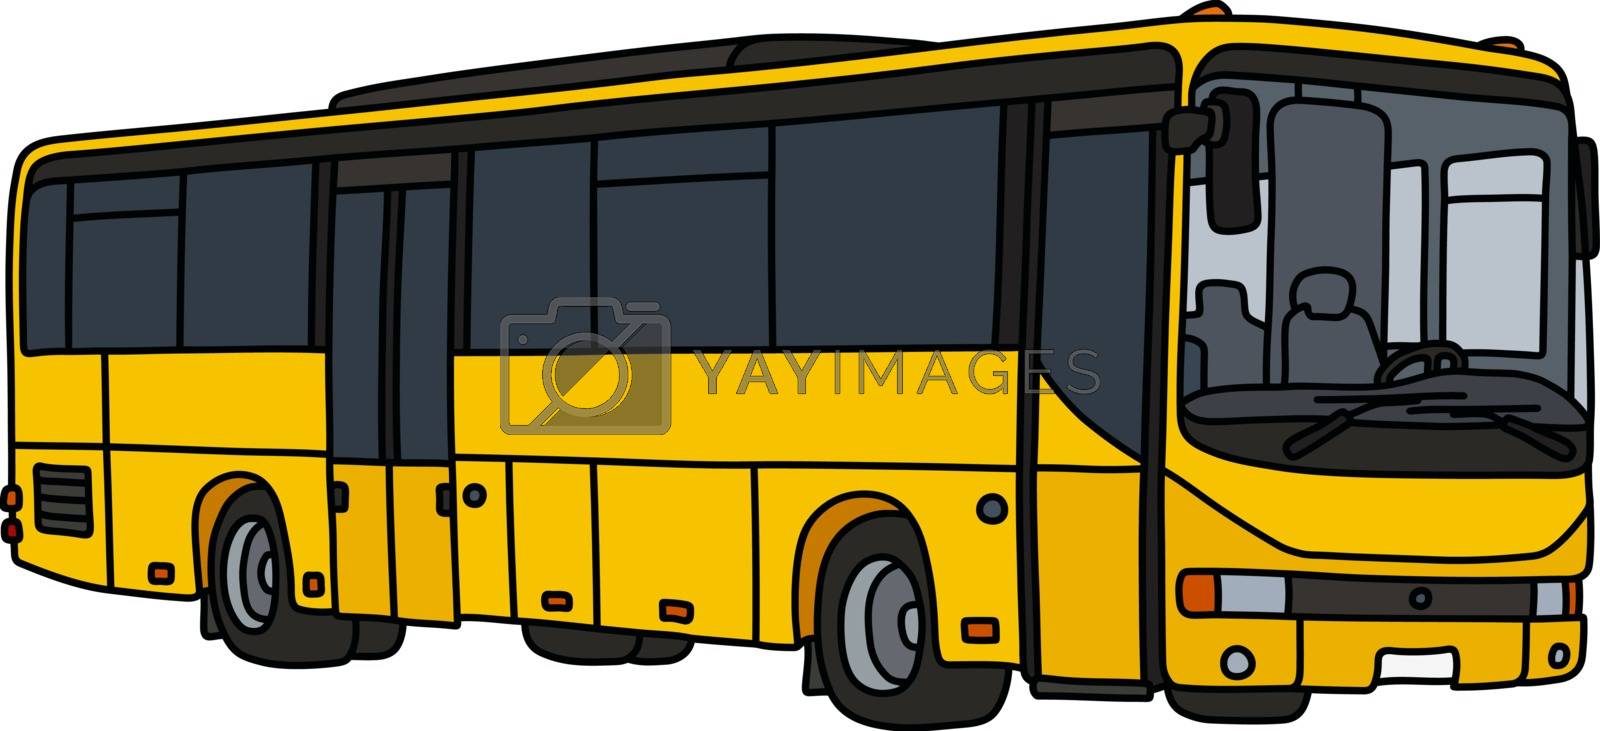 Royalty free image of The yellow touristic bus by vostal